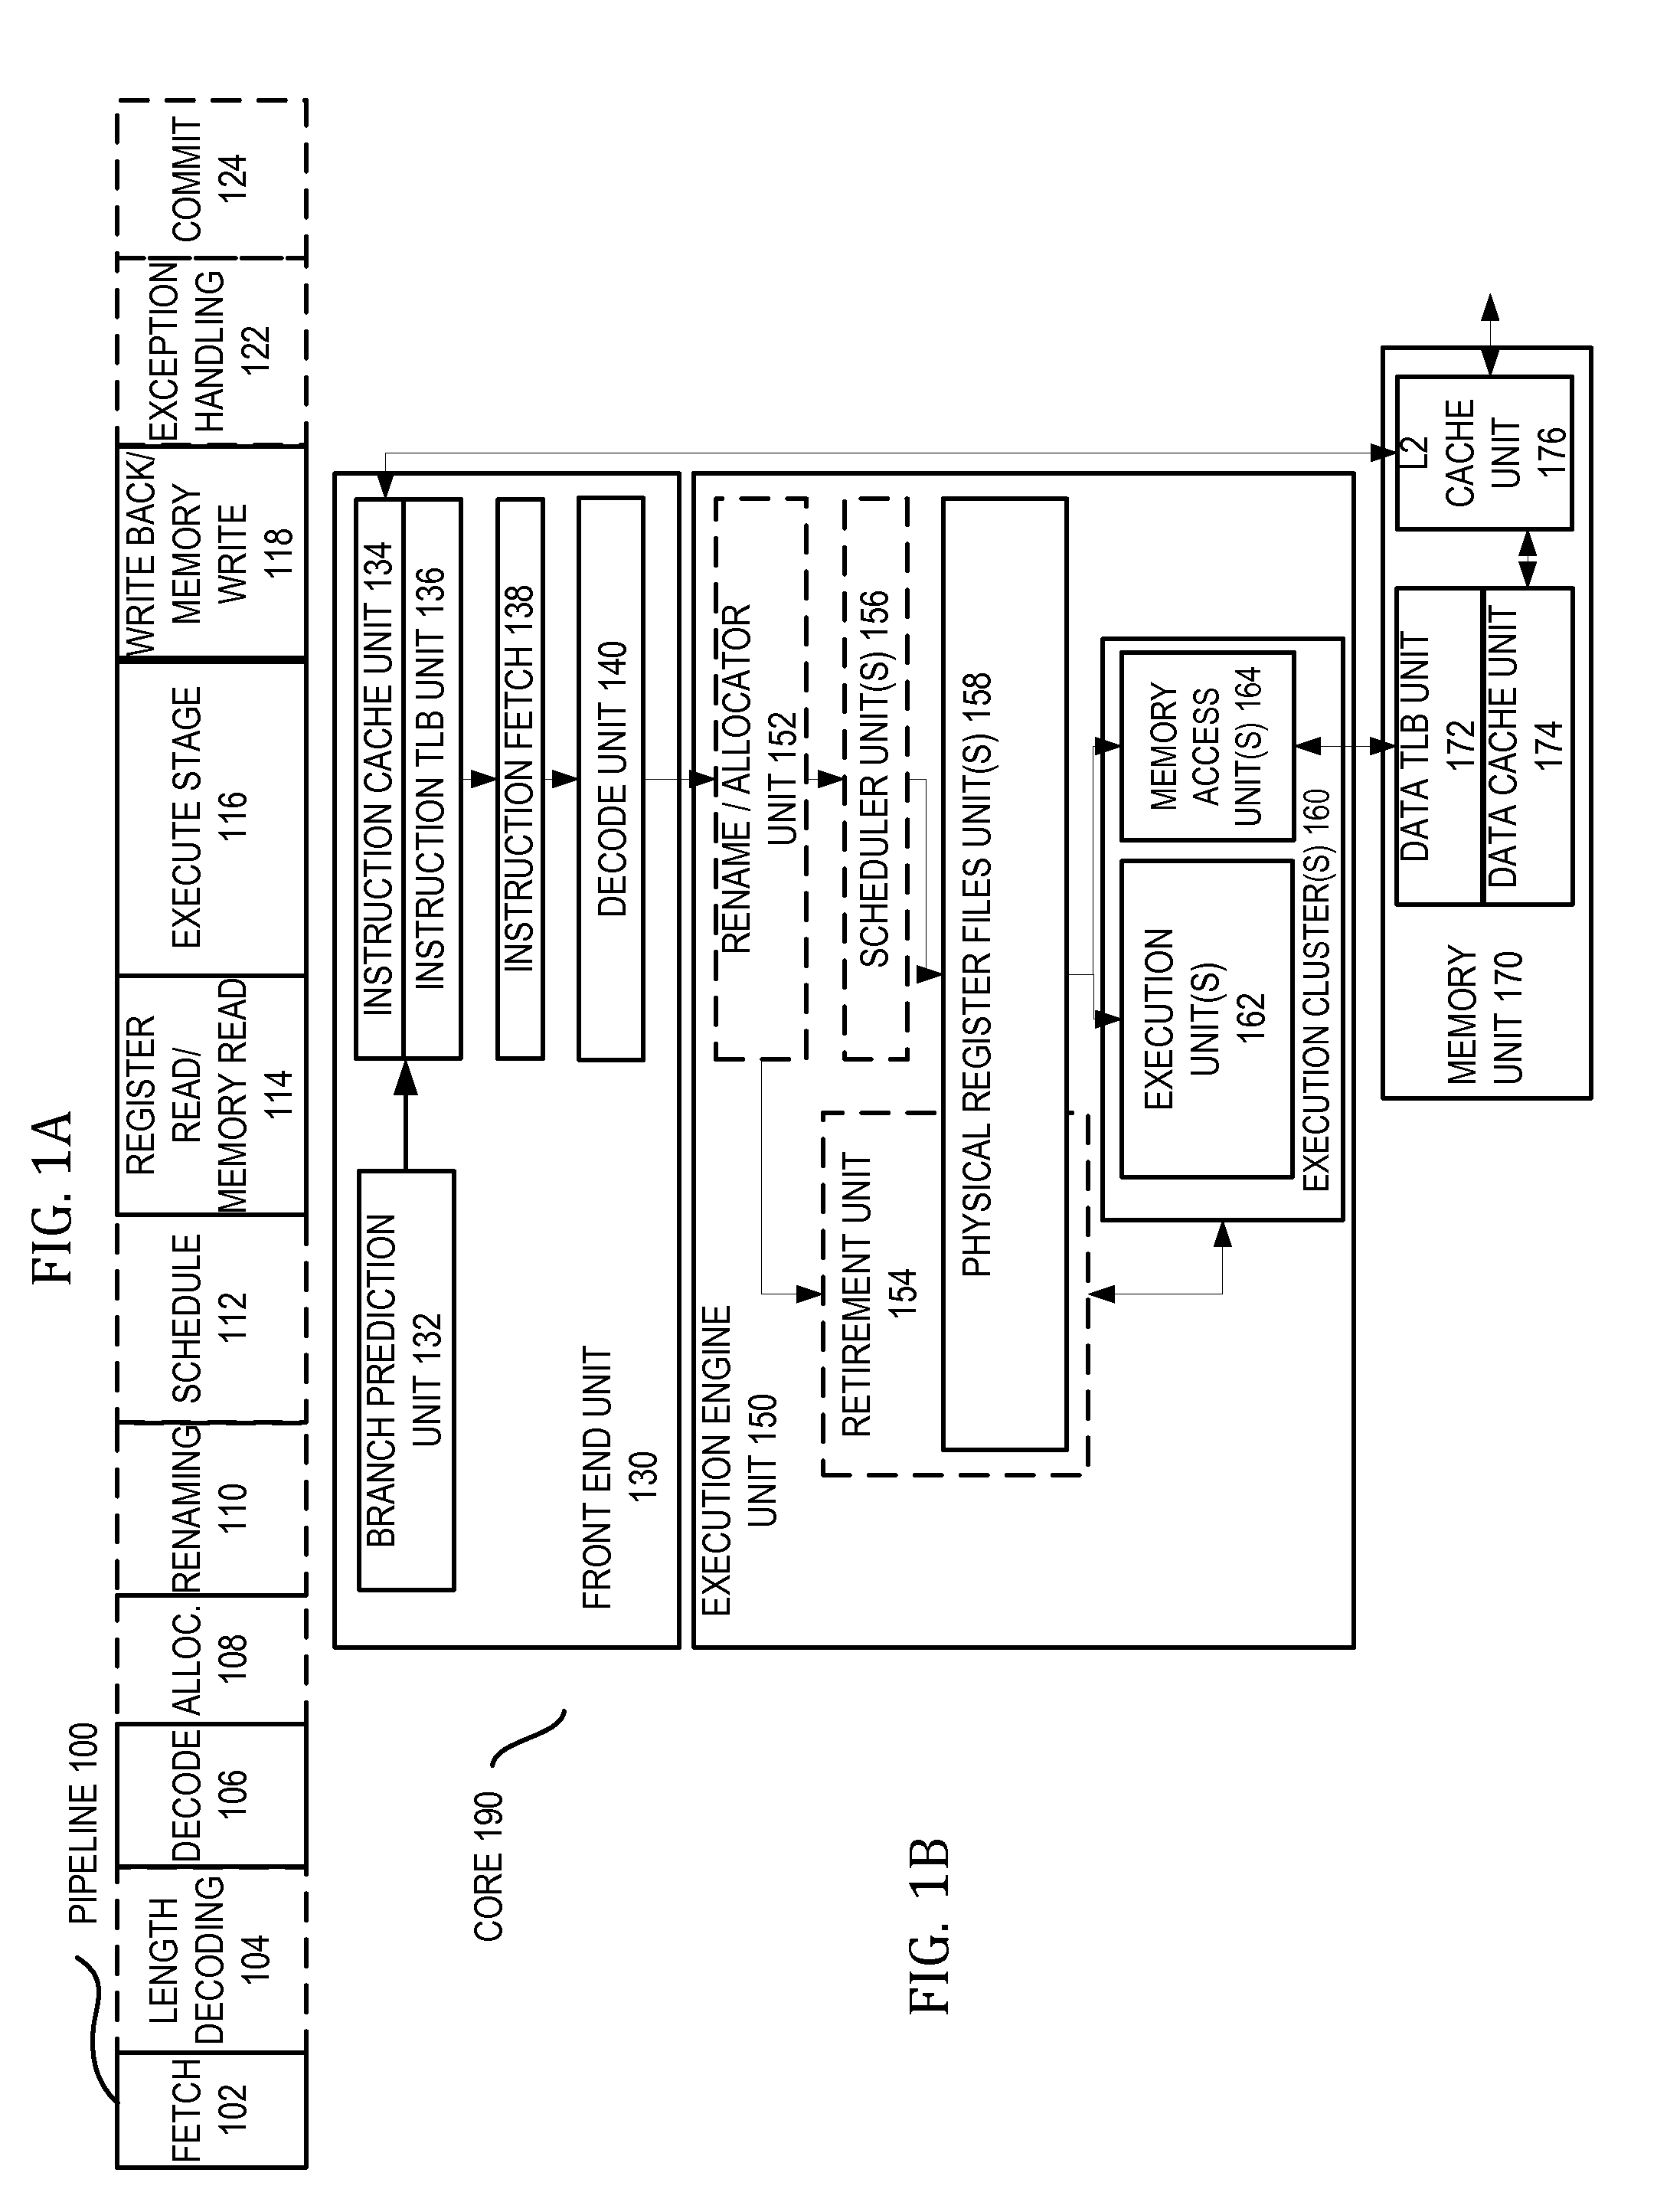 Collective communications apparatus and method for parallel systems